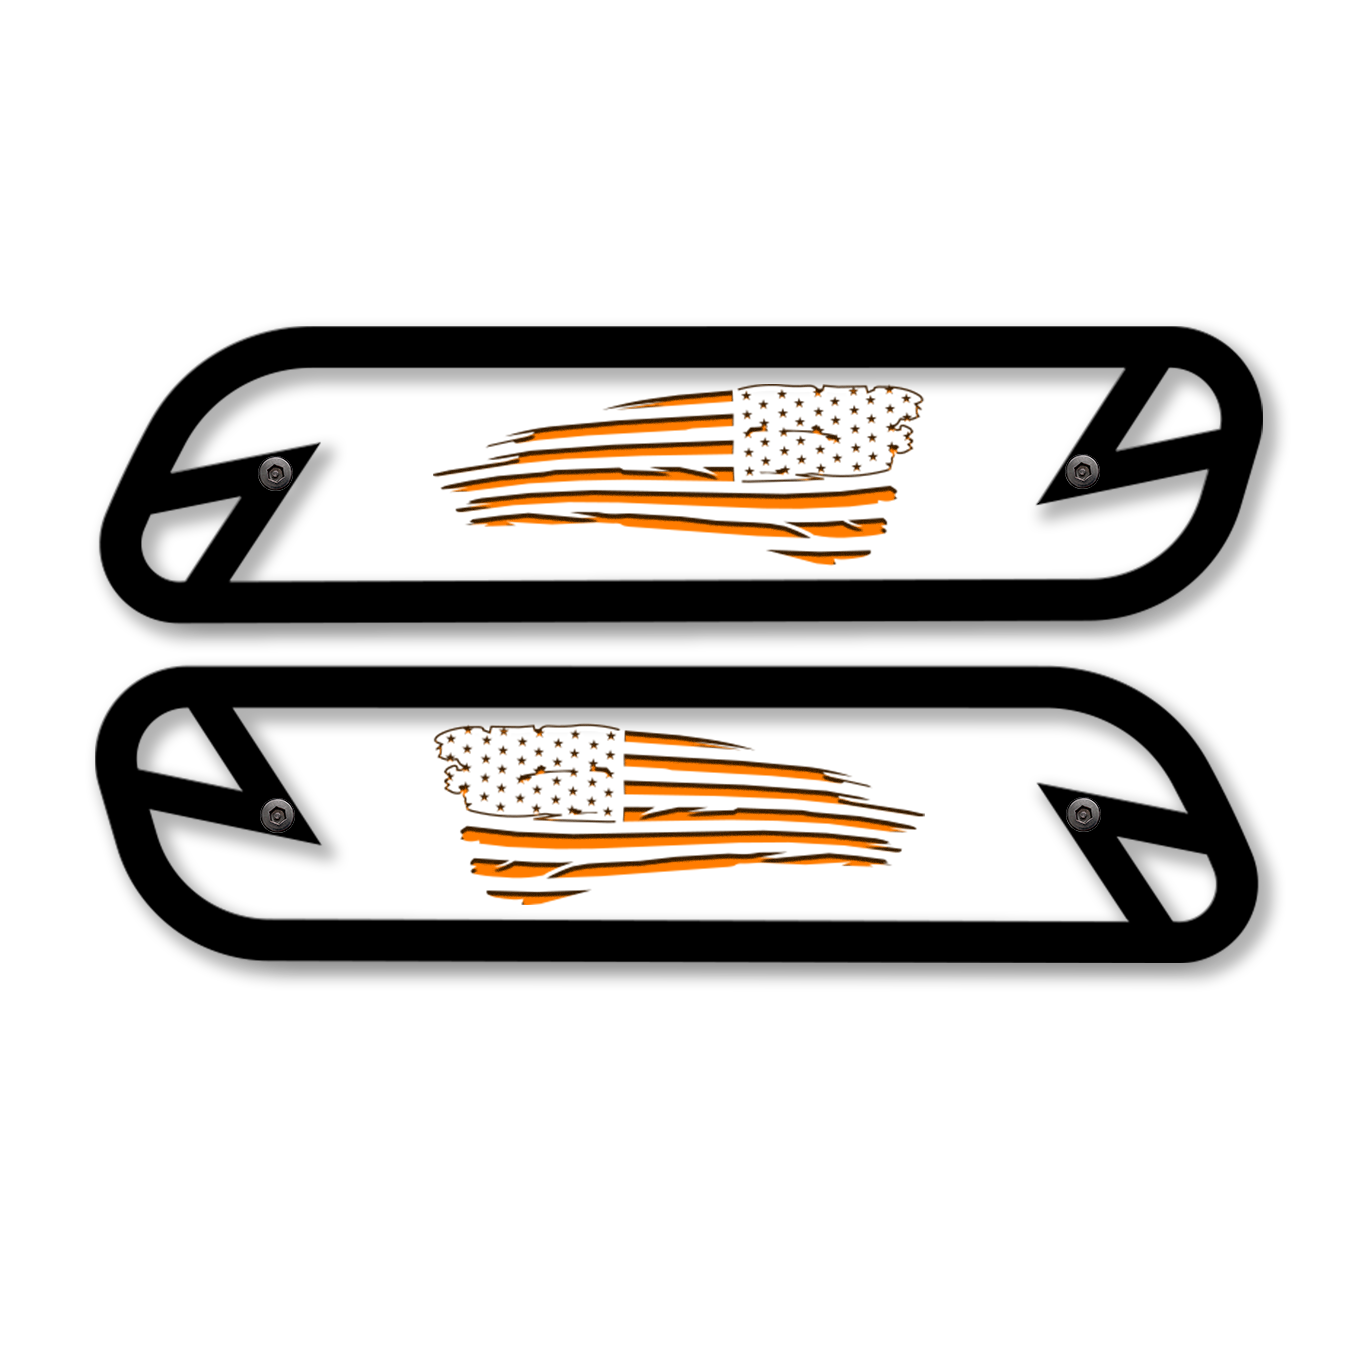 Tattered Flag Hood Emblem Replacements - Fits 2019-2022 Ram® 2500, 3500, 4500 - Fully Customizable, LED or Non-LED